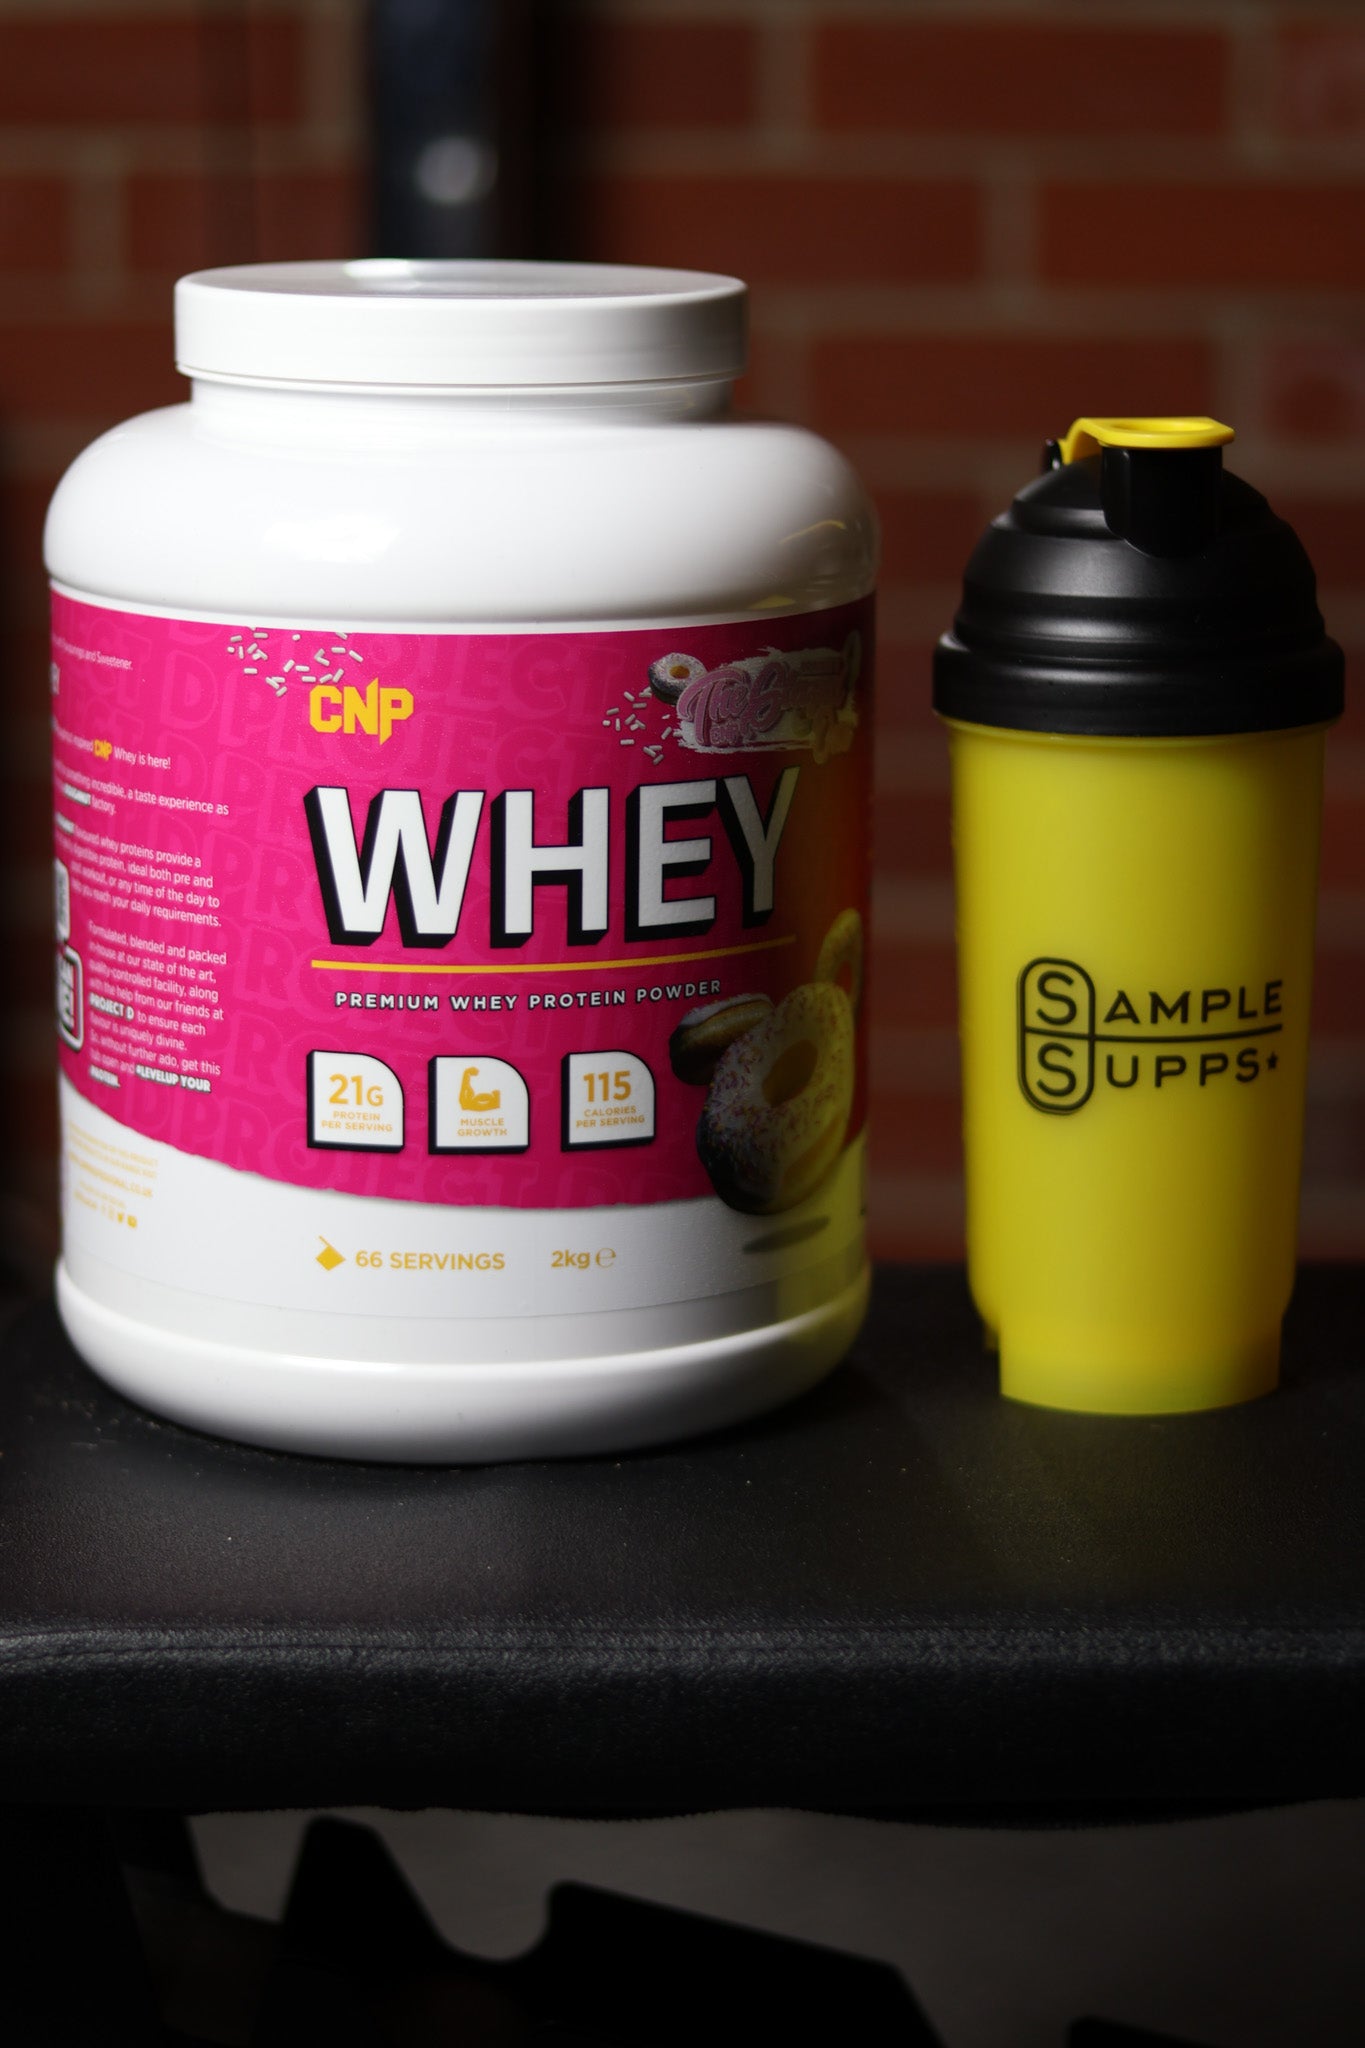 CNP Professional Whey The Glazed One